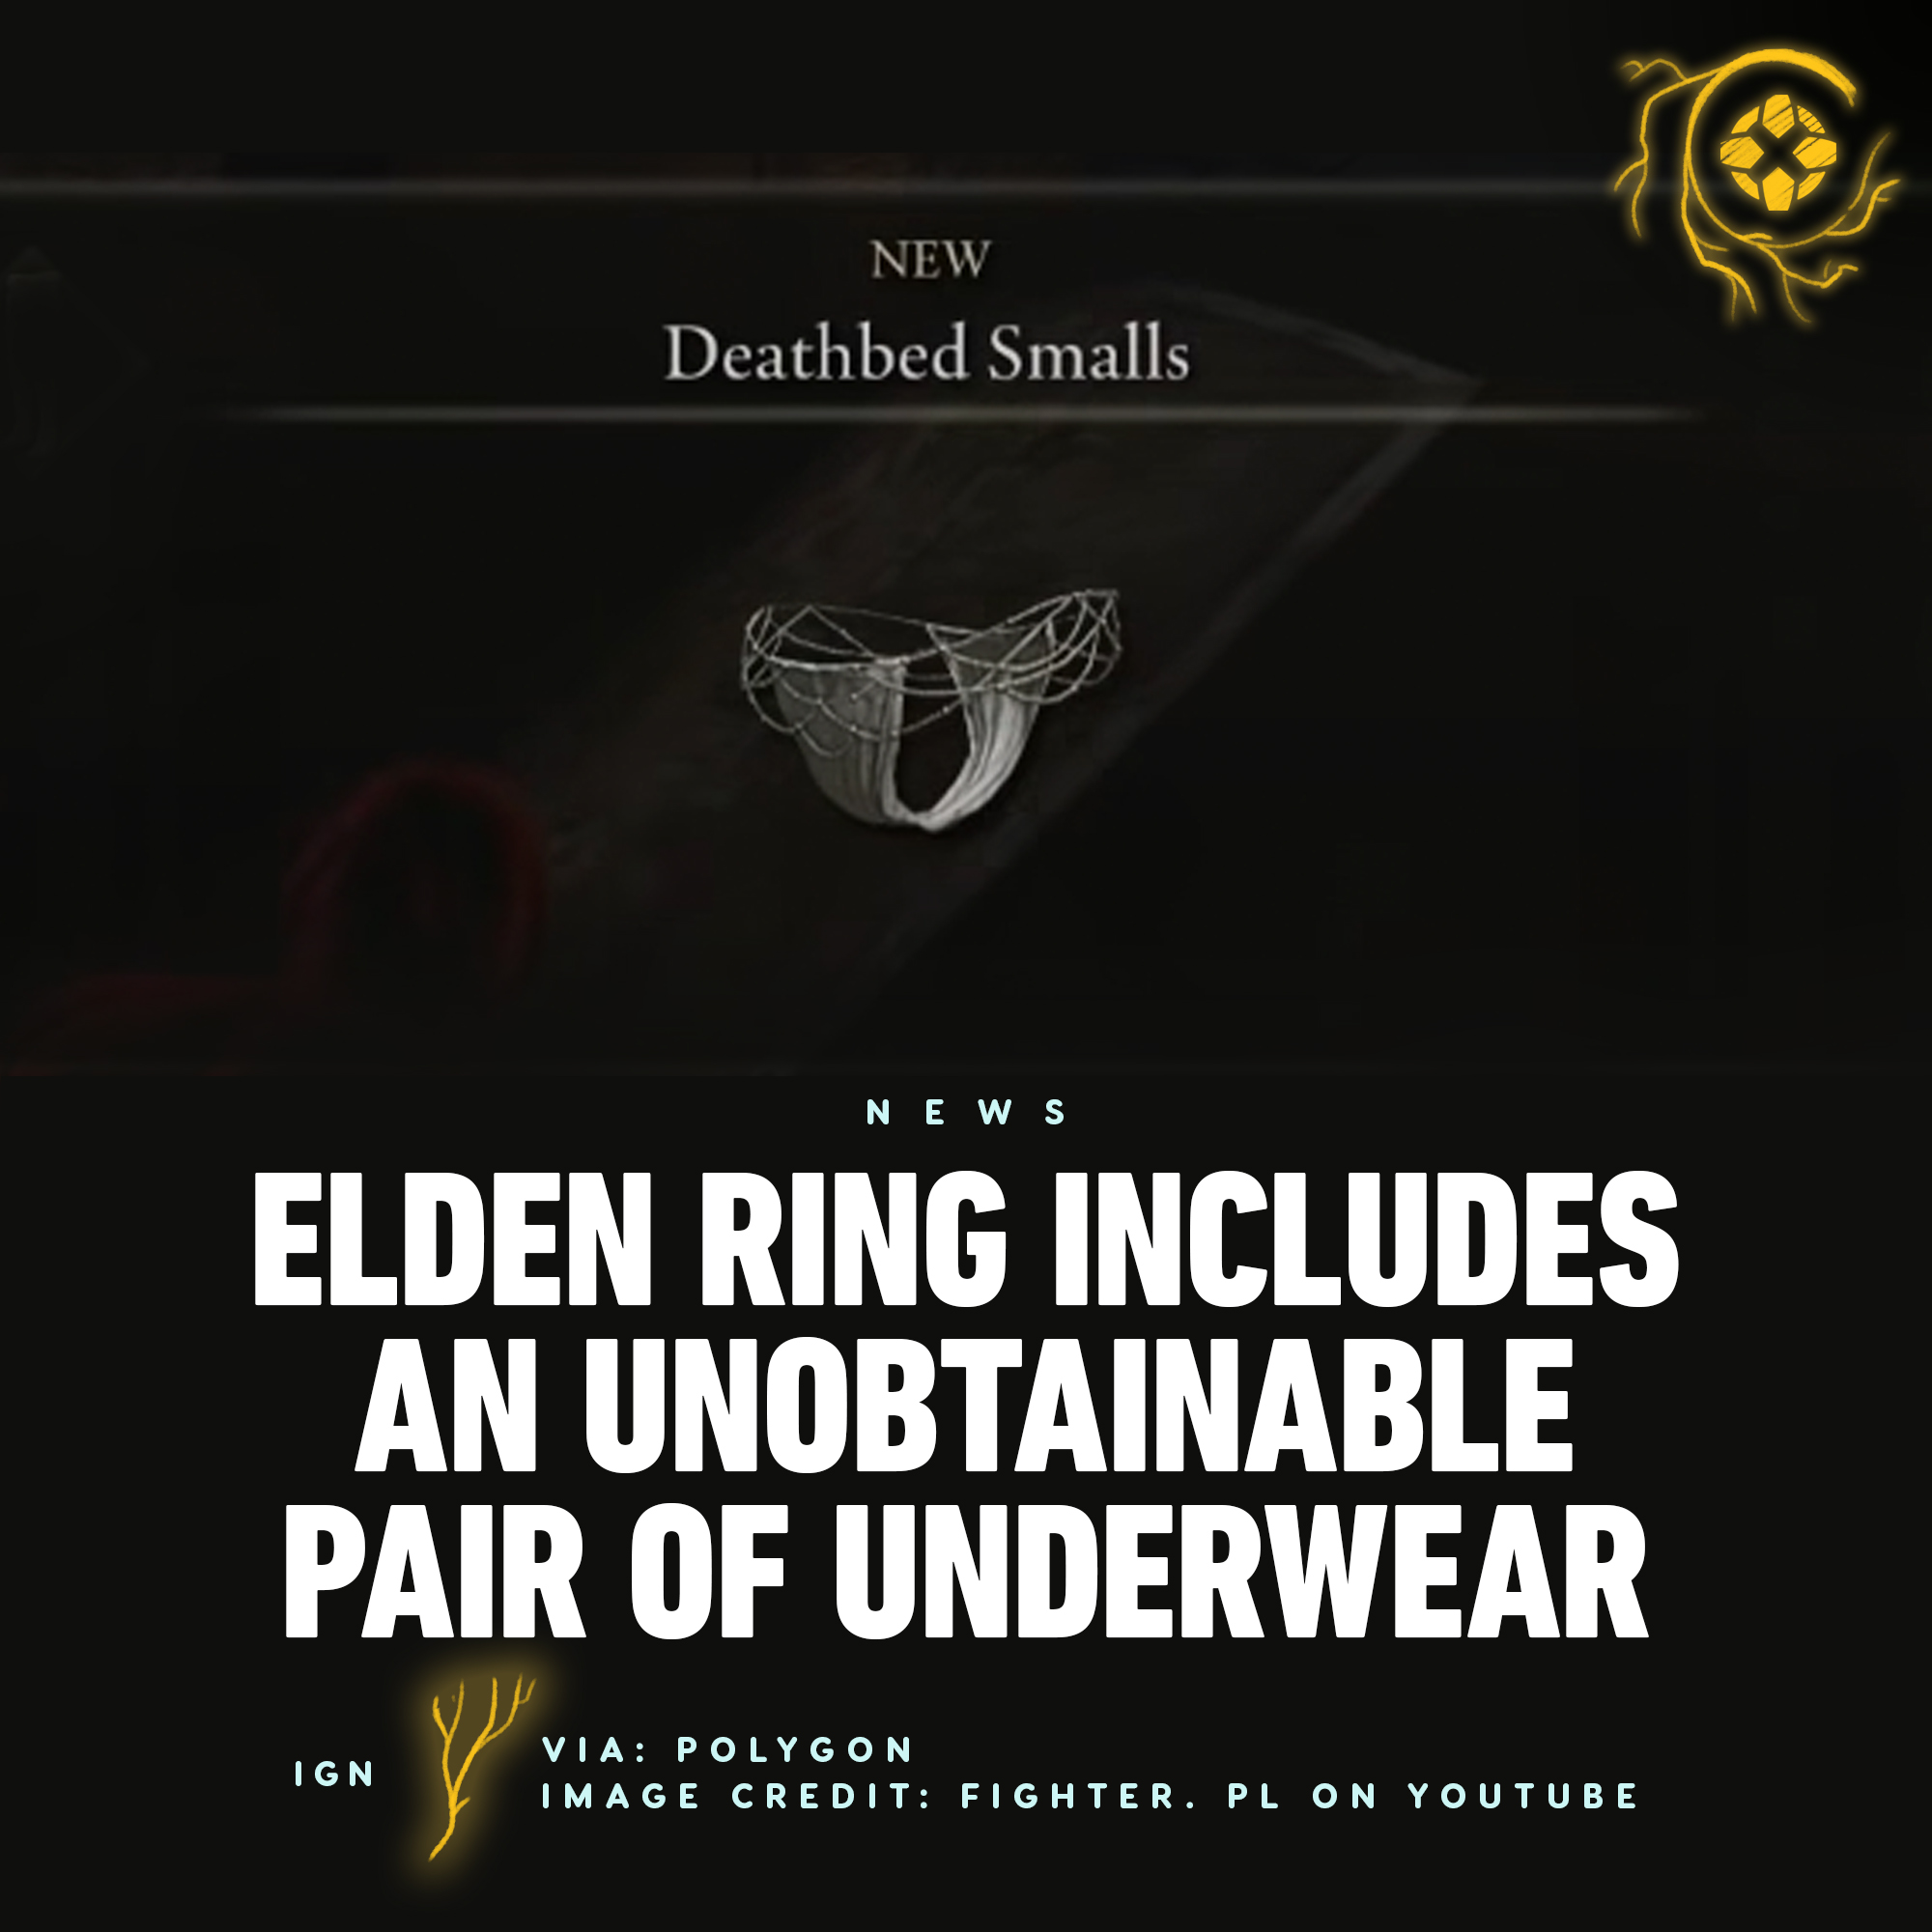 IGN on Twitter "The Deathbed Smalls is a fancy pair of underwear that